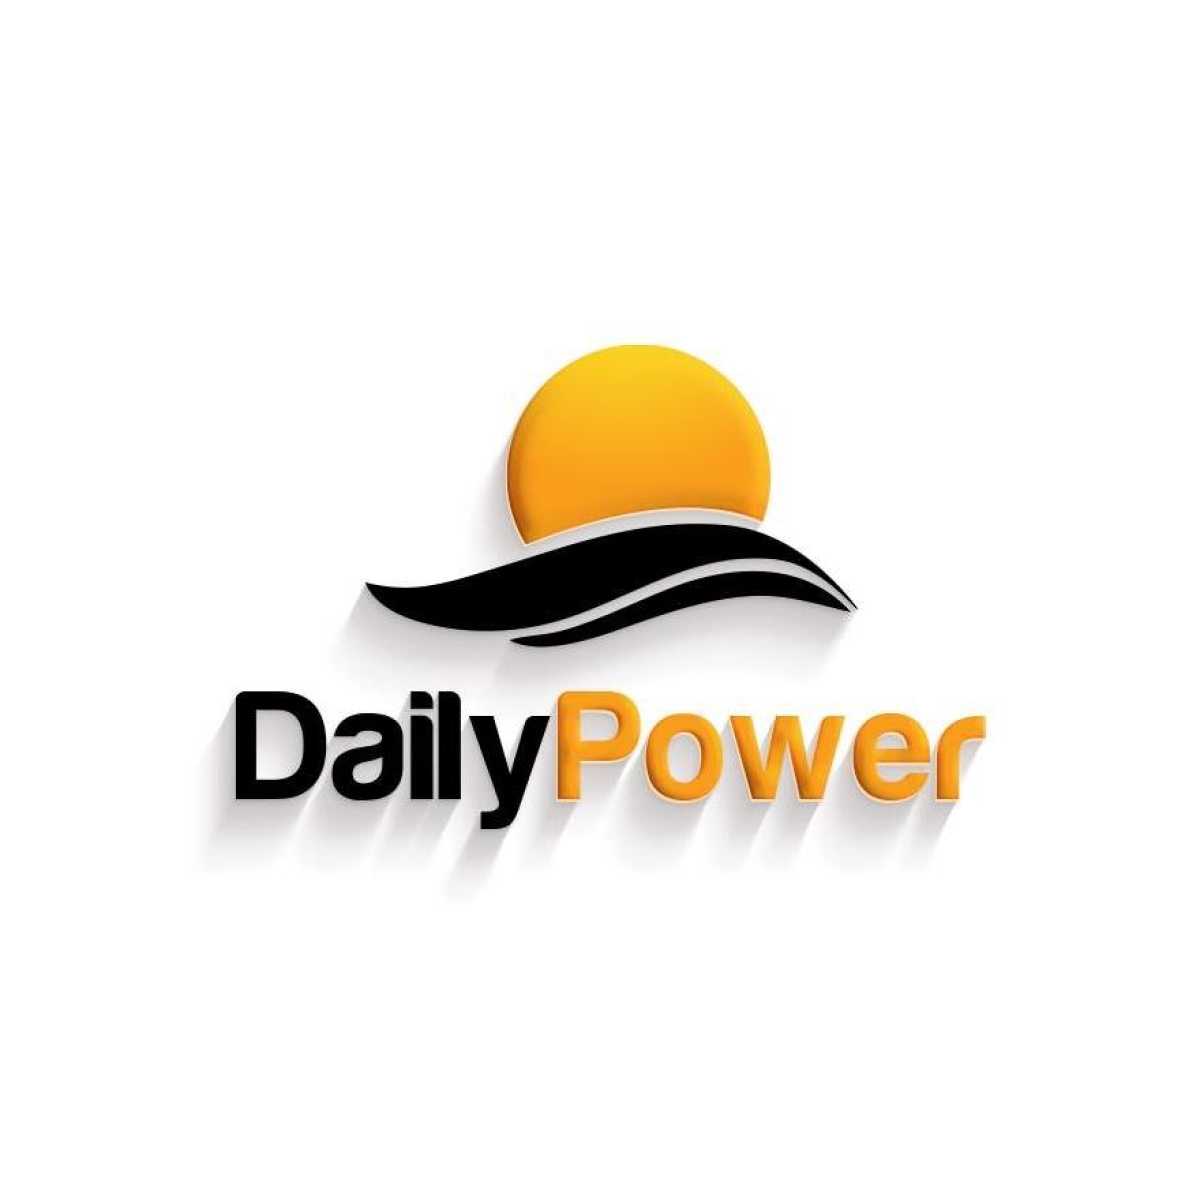 dailypower is posting a new every day